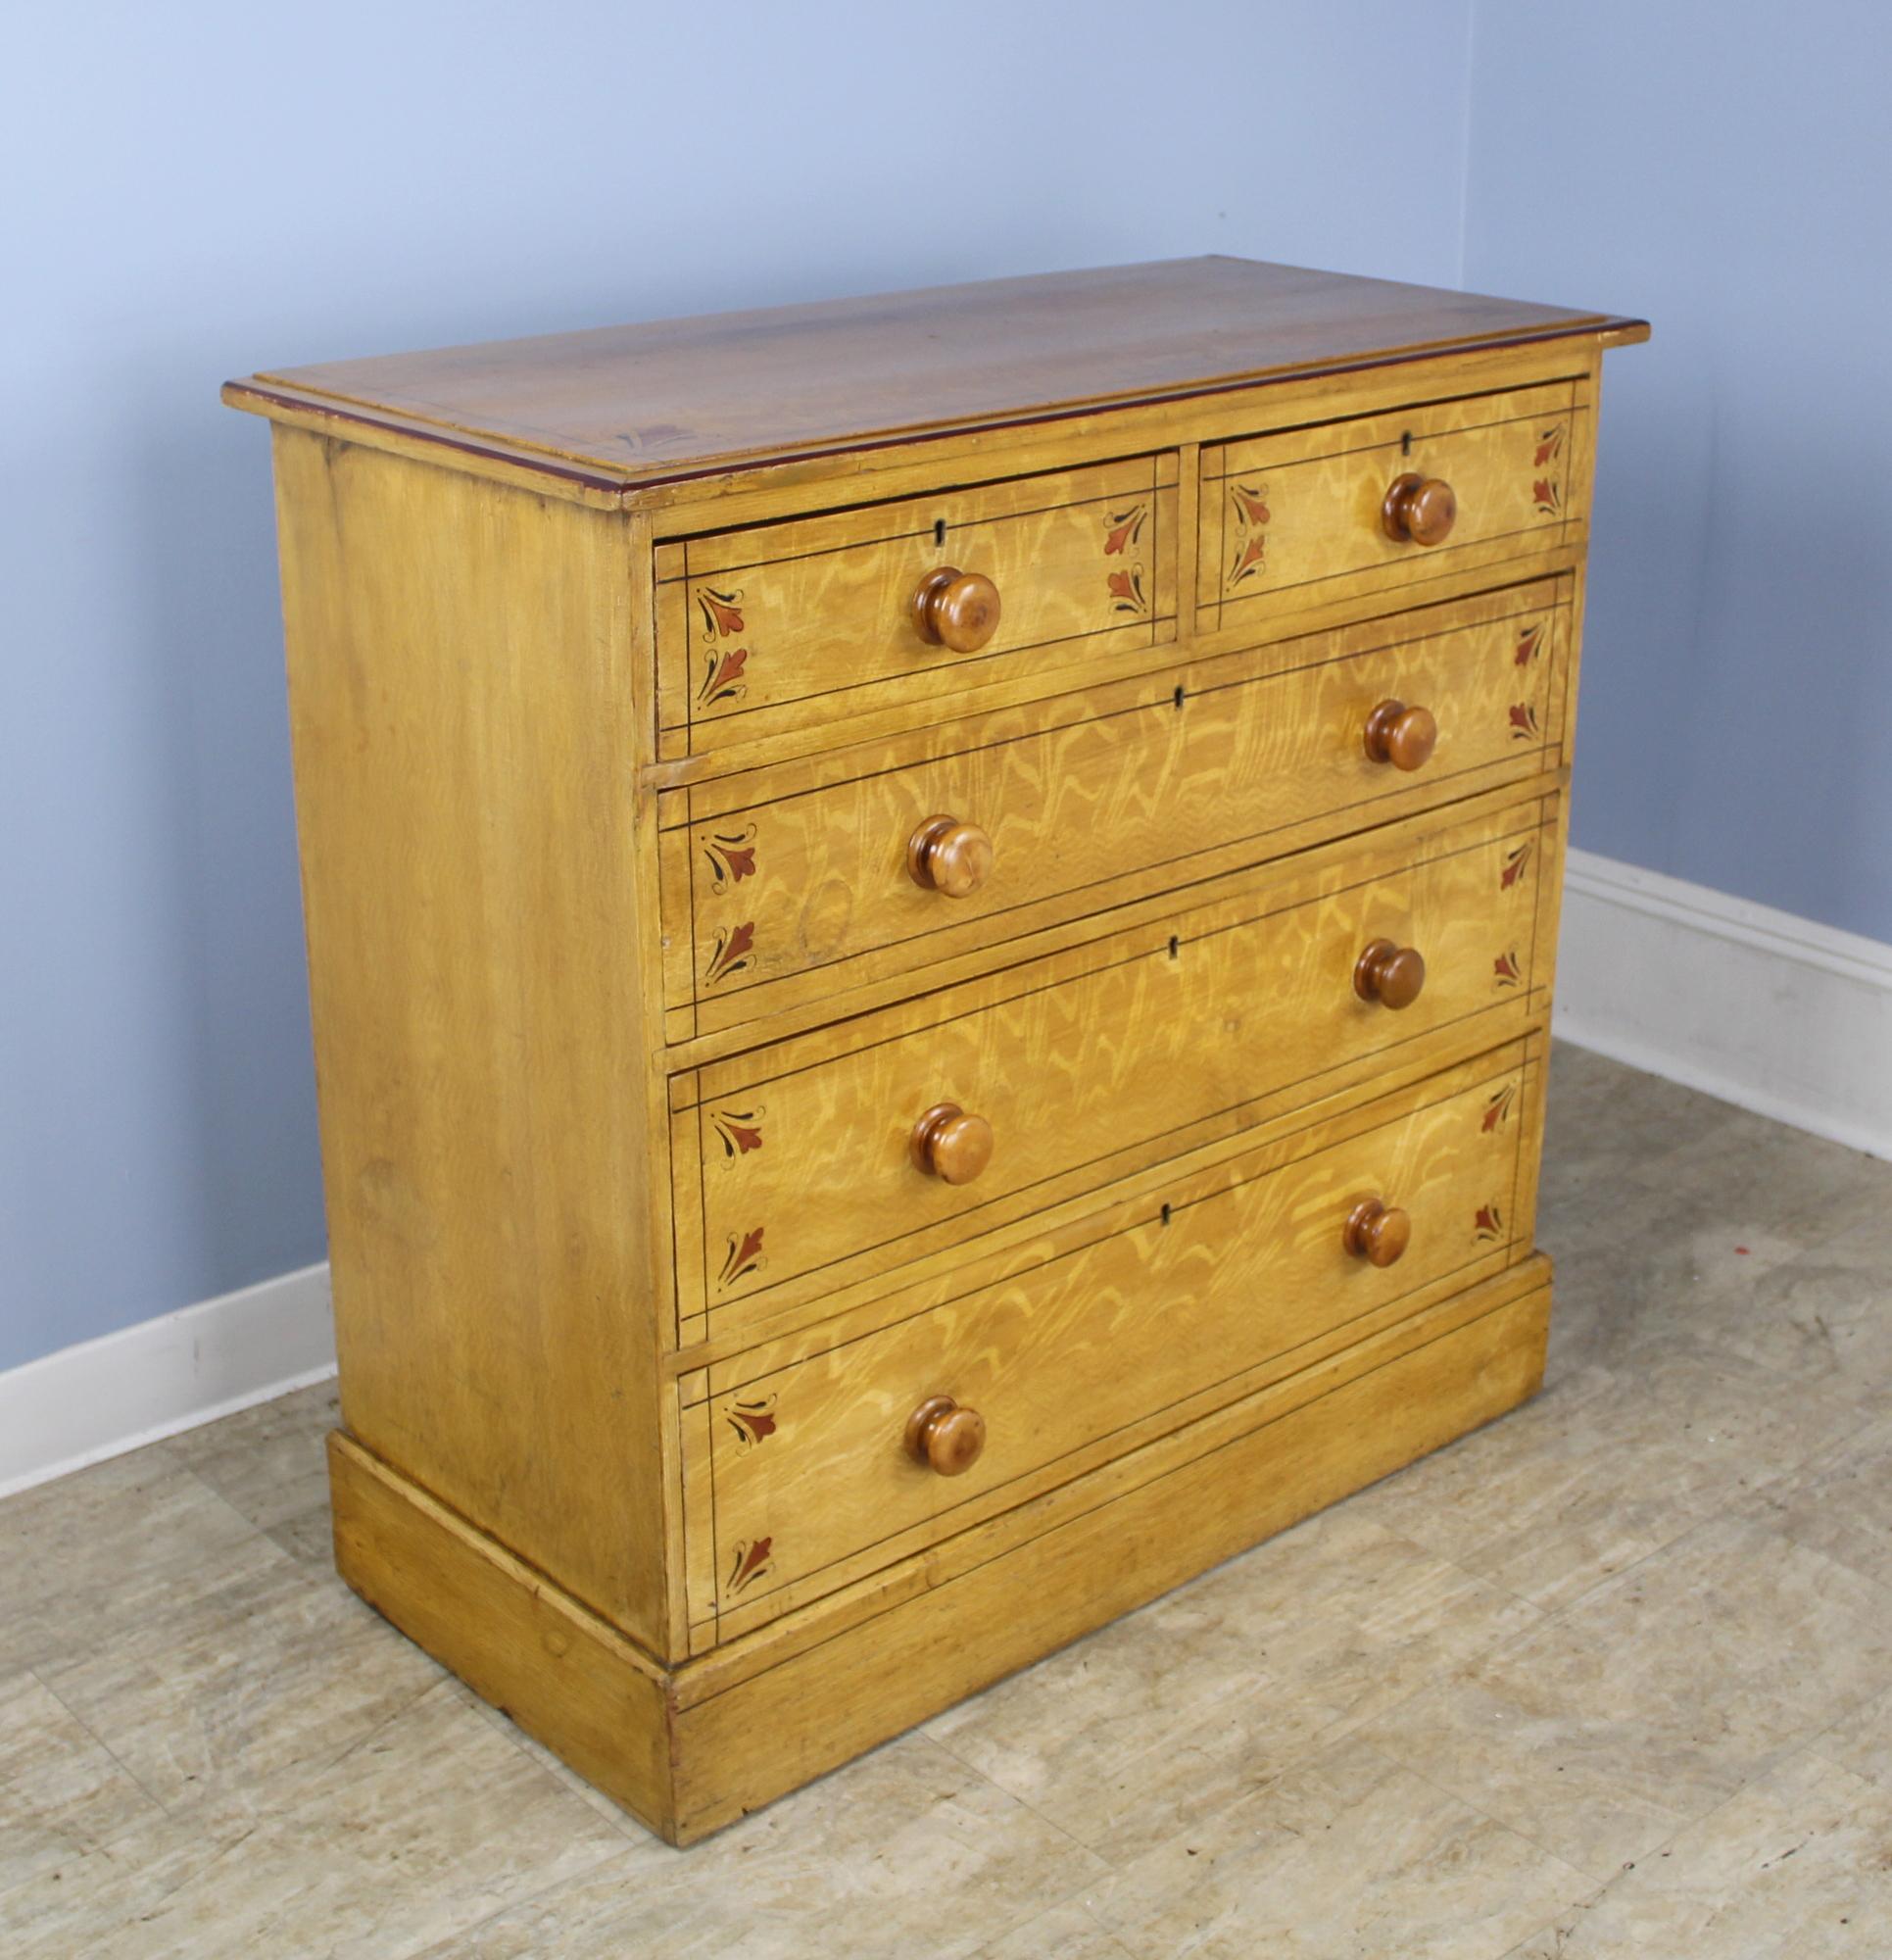 A whimsically hand painted honey colored pine chest of drawers. Charming molded top and plinth. Drawers are clean and slide easily. There is one key that locks all the drawers.